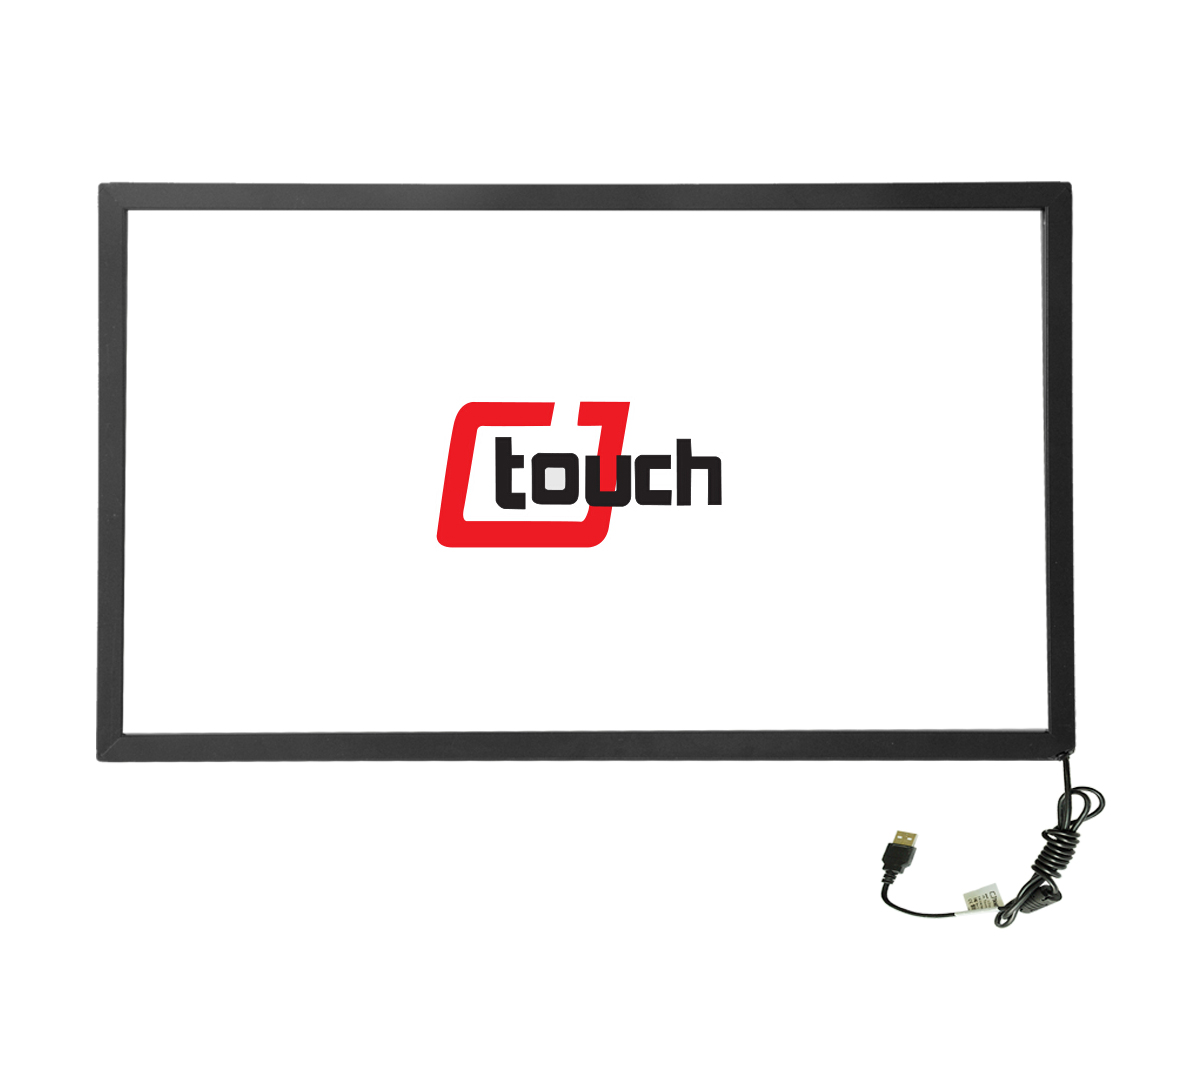 https://www.cjtouch.com/high-quality-multi-points-ir-21-5-inch-screen-touch-screen-frame-kit-product/